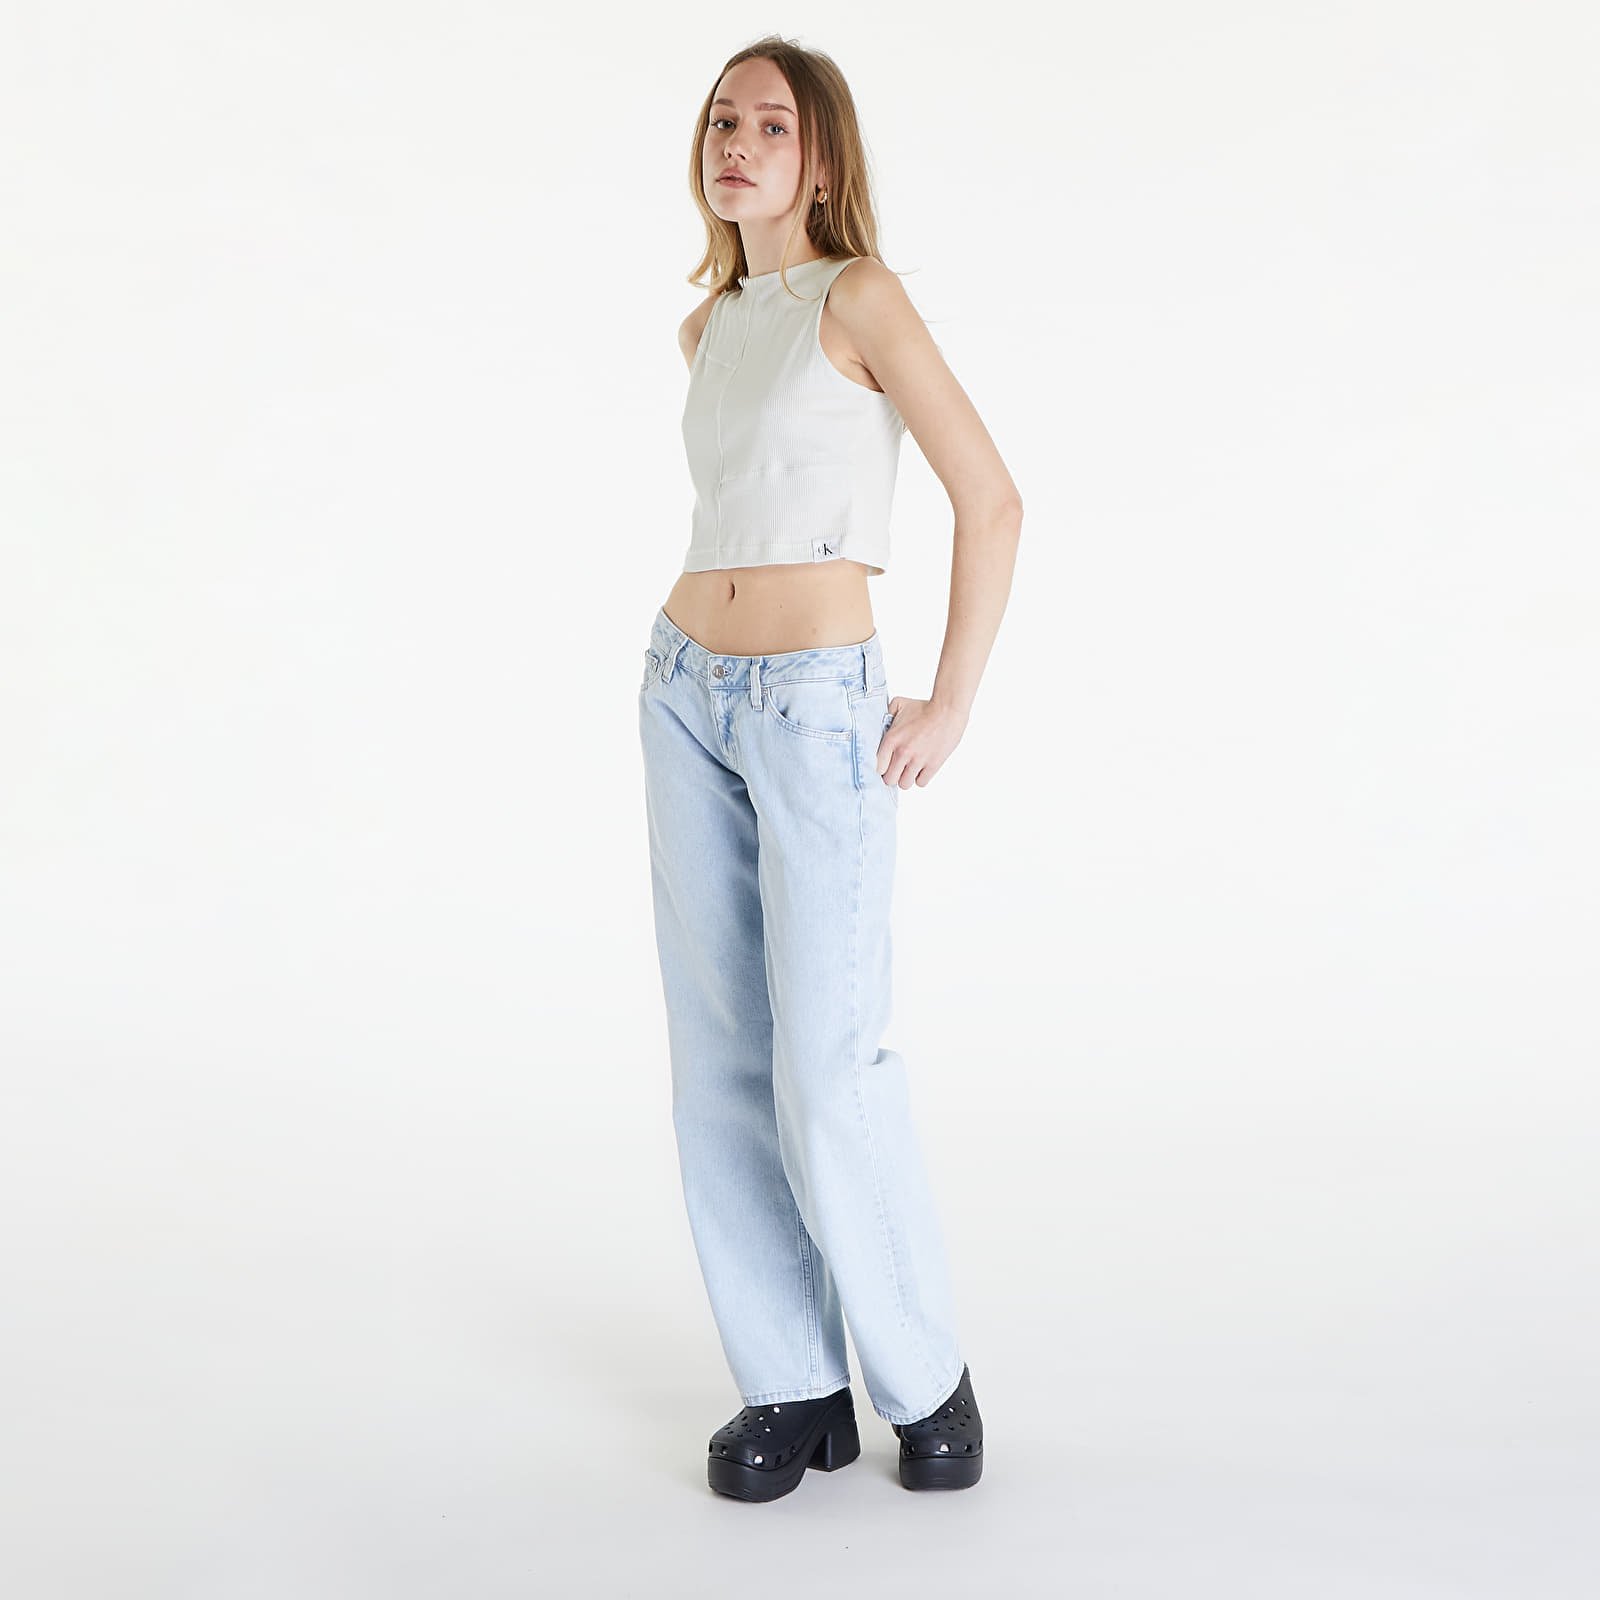 Jeans Seaming Rib Tank Top Icicle